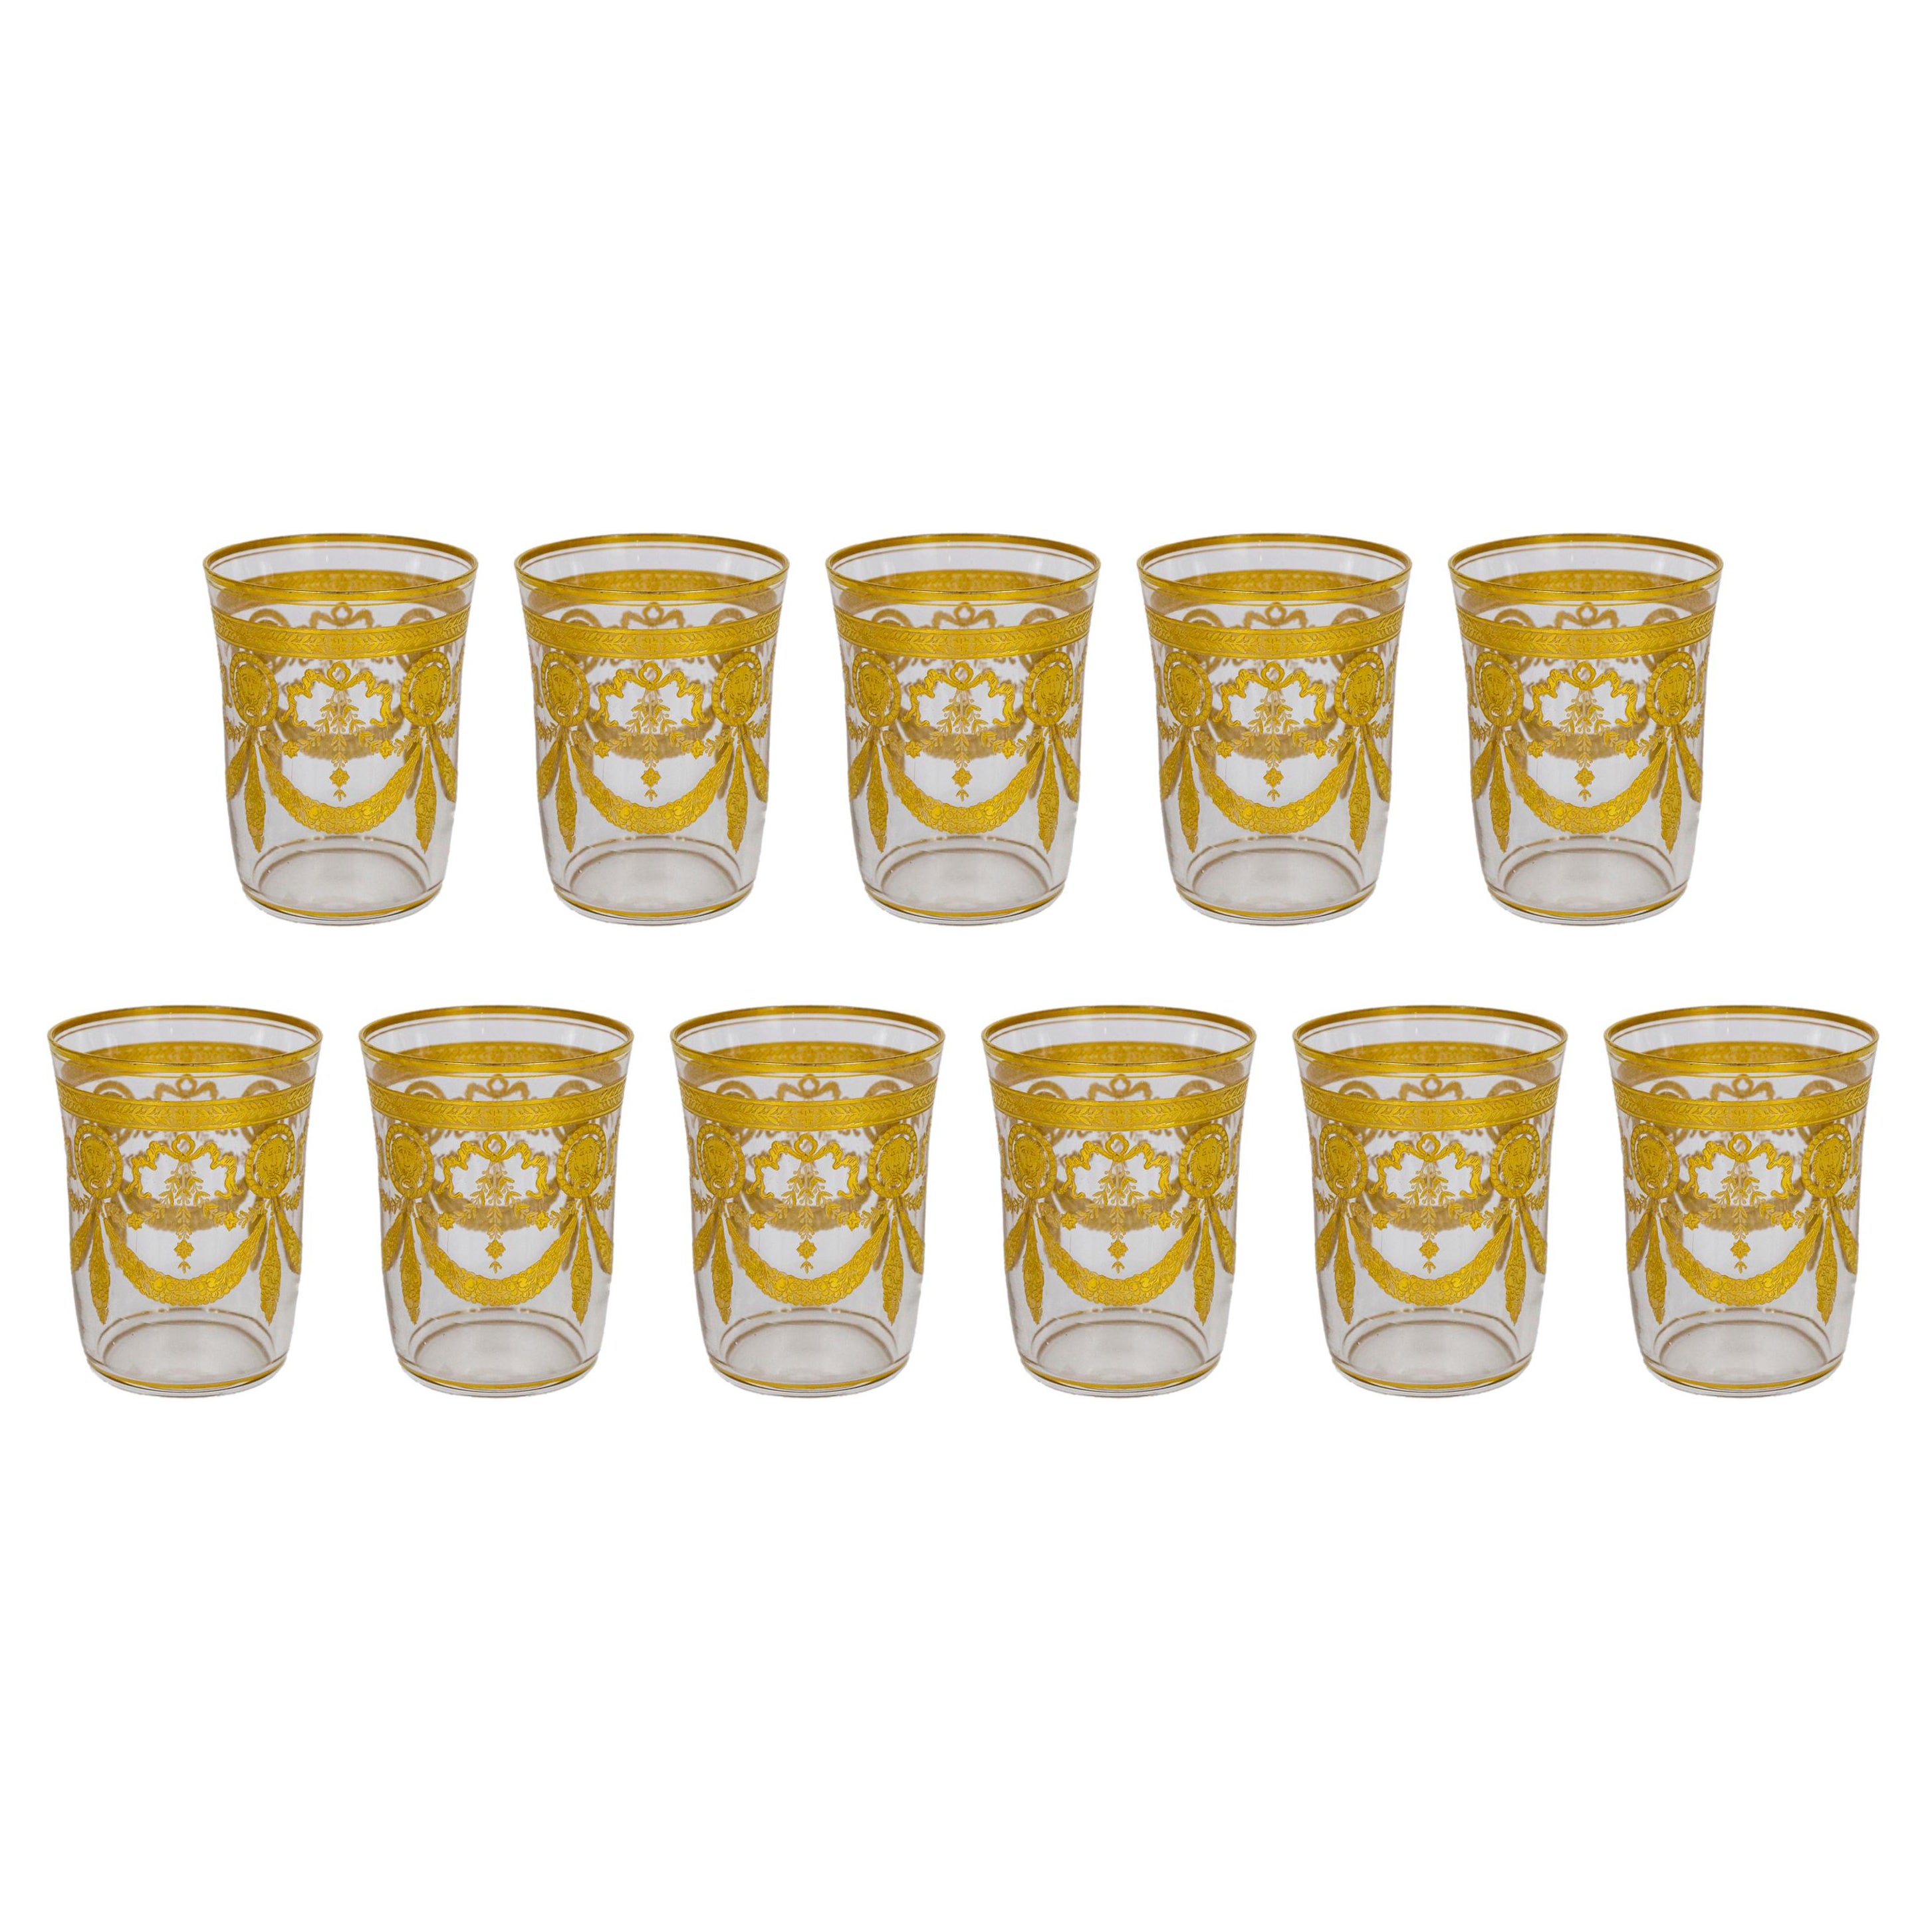 Congress Style Gilt Crystal Tumblers by Saint-Louis, Set of 11